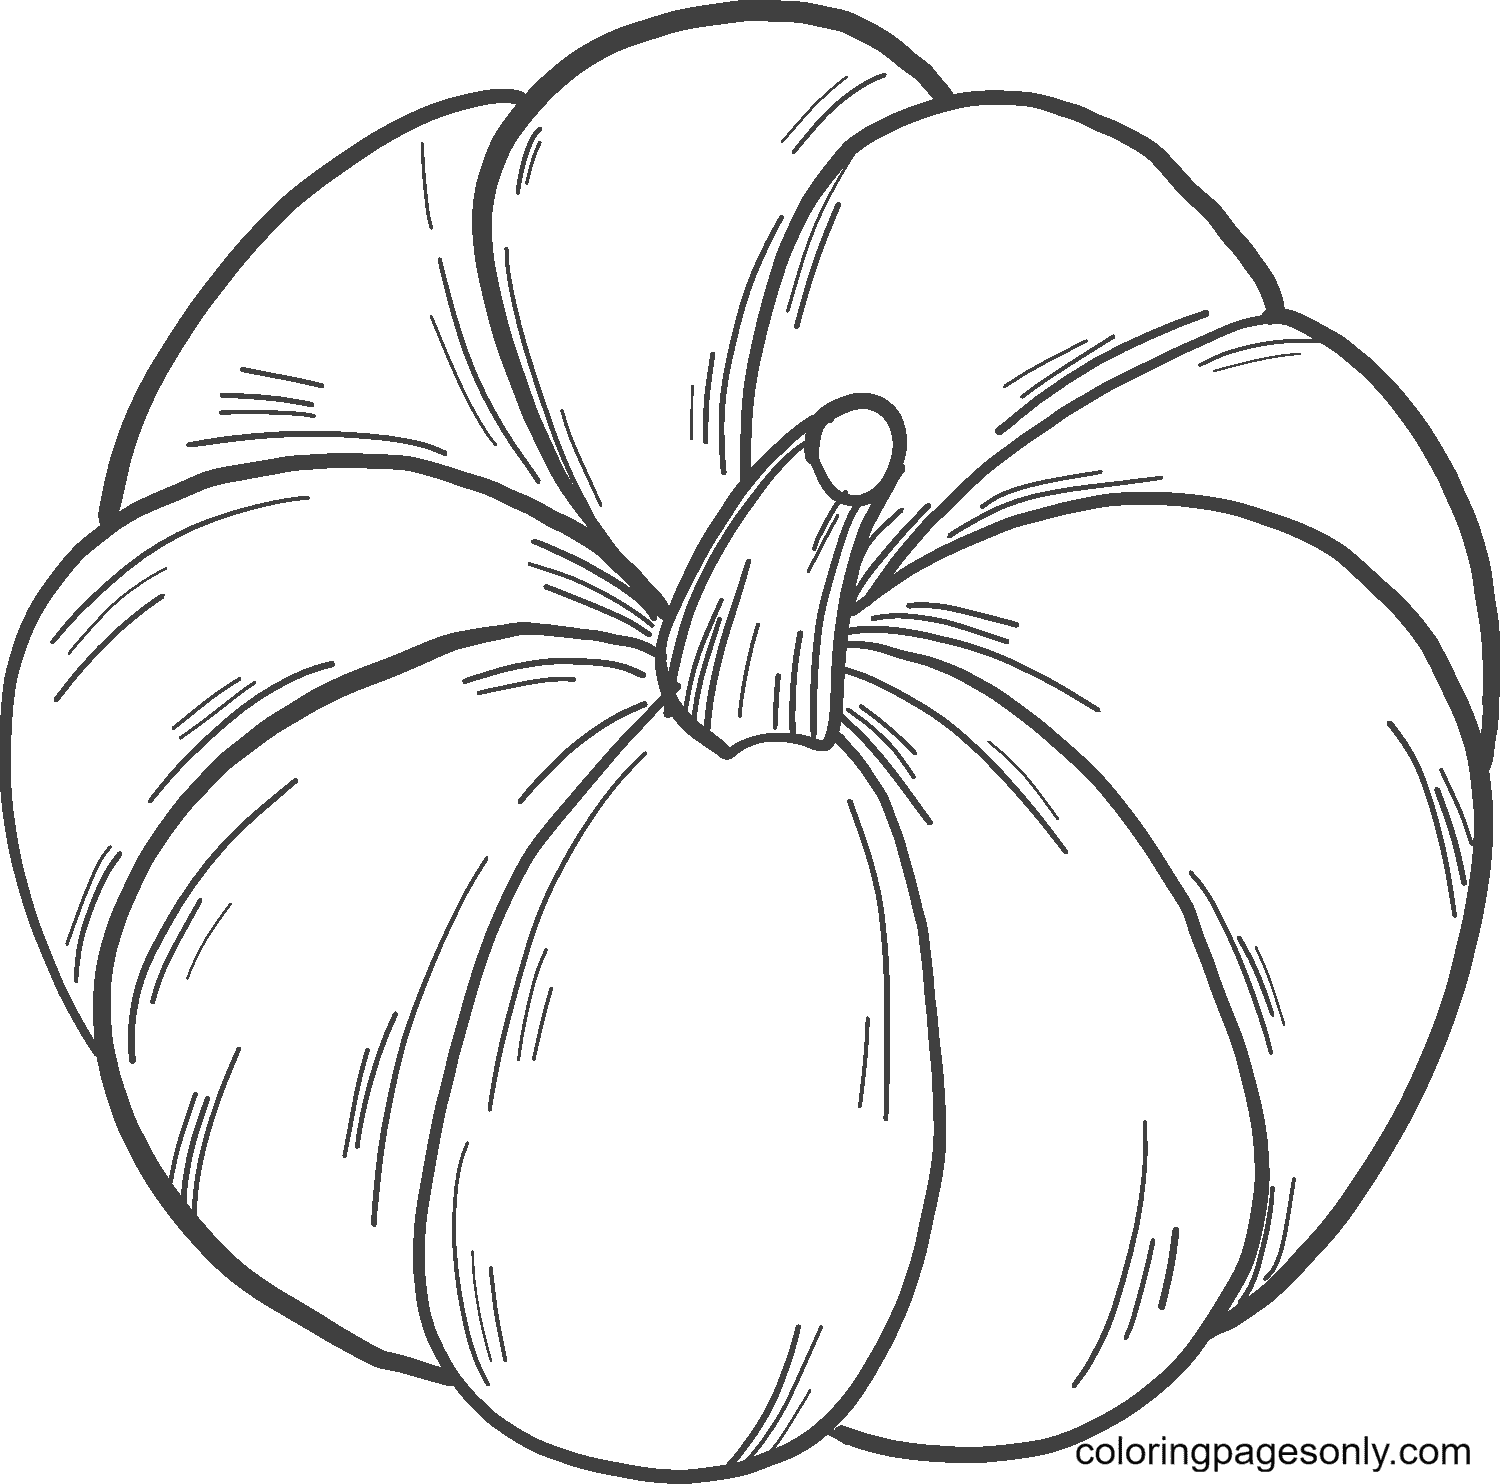 Pumpkin like a Flower Coloring Page